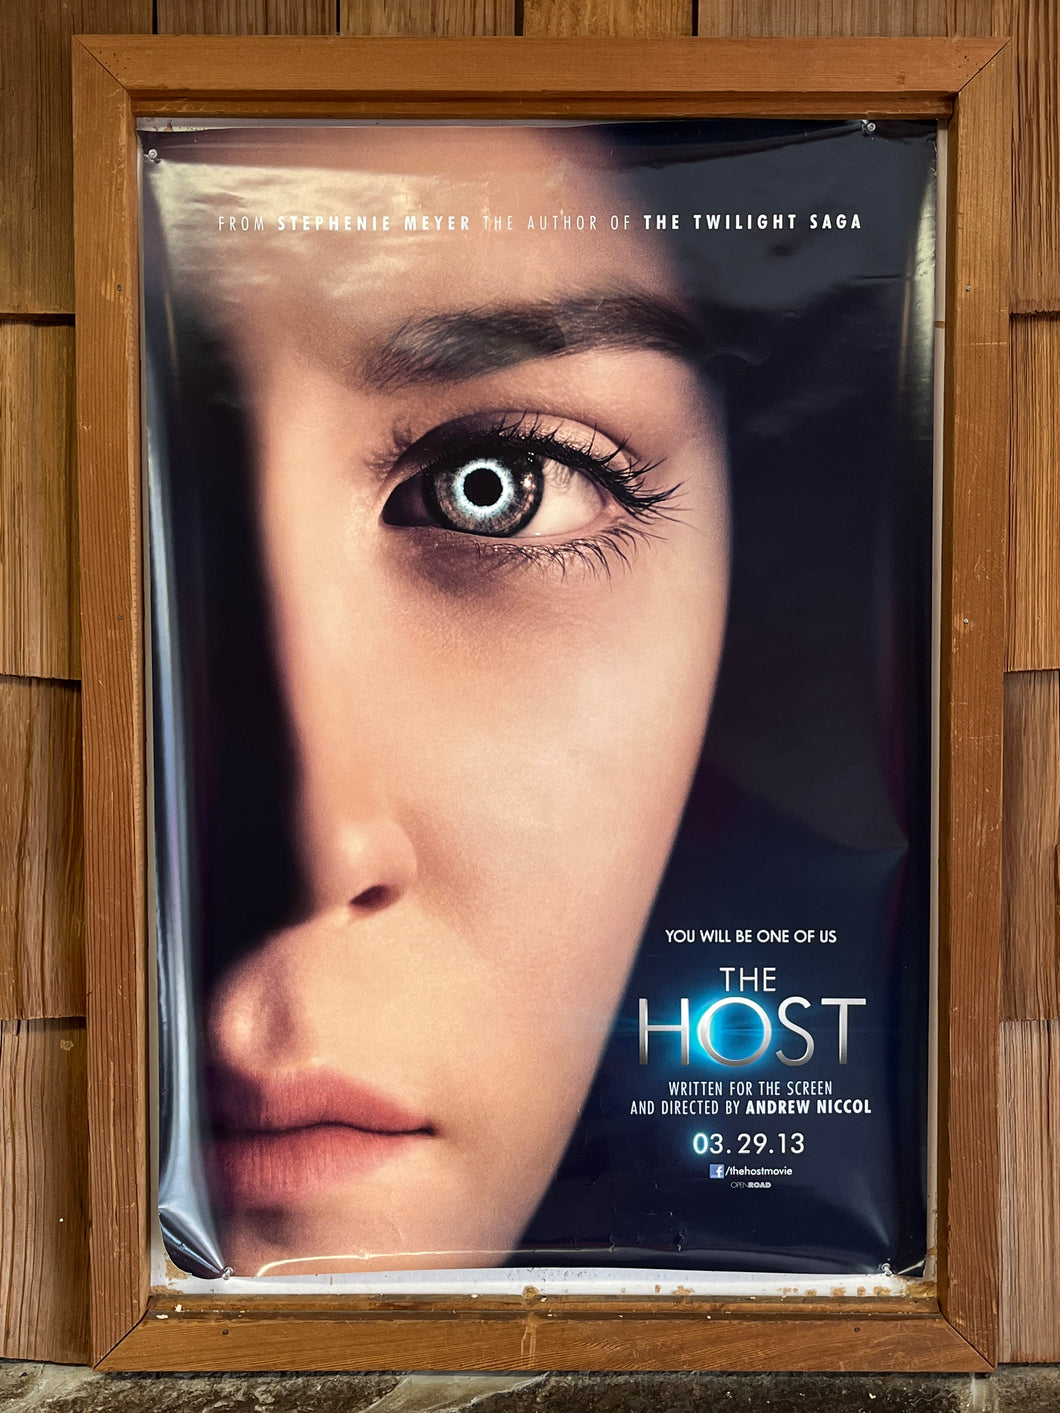 Host, The (2013)